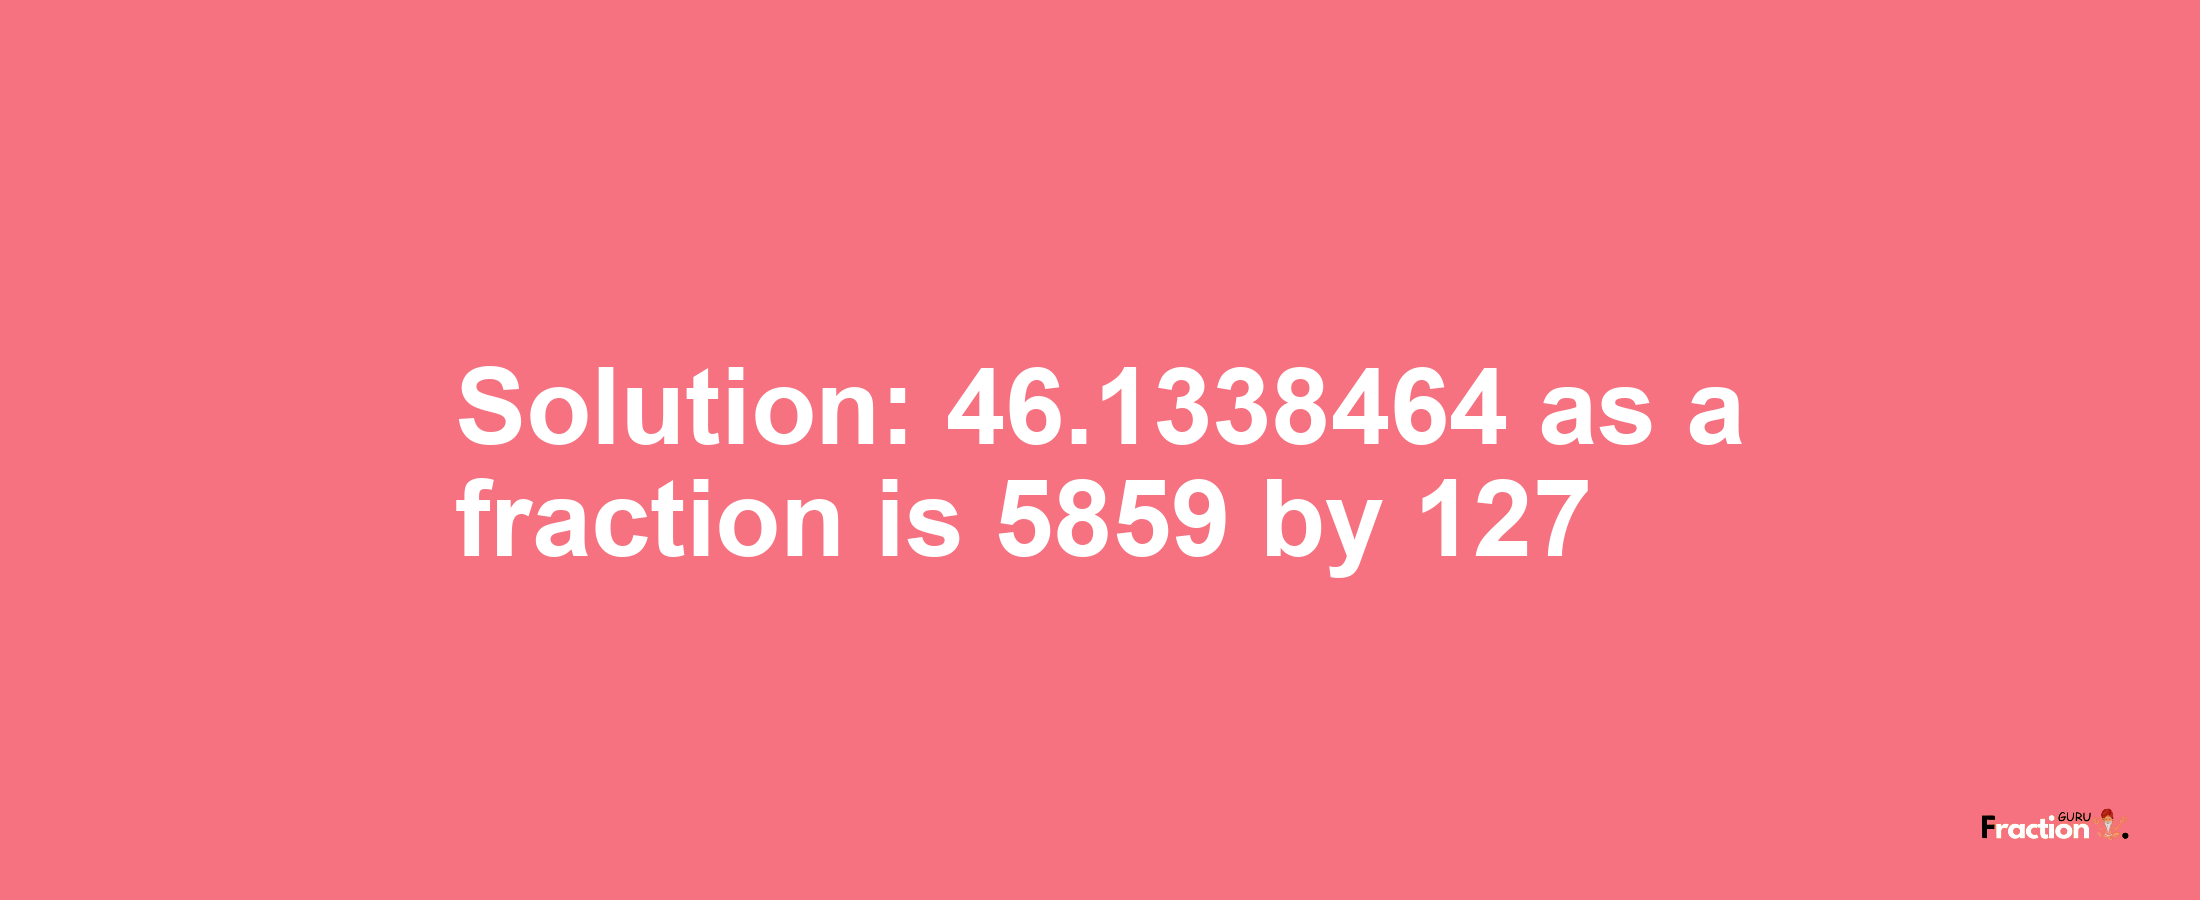 Solution:46.1338464 as a fraction is 5859/127